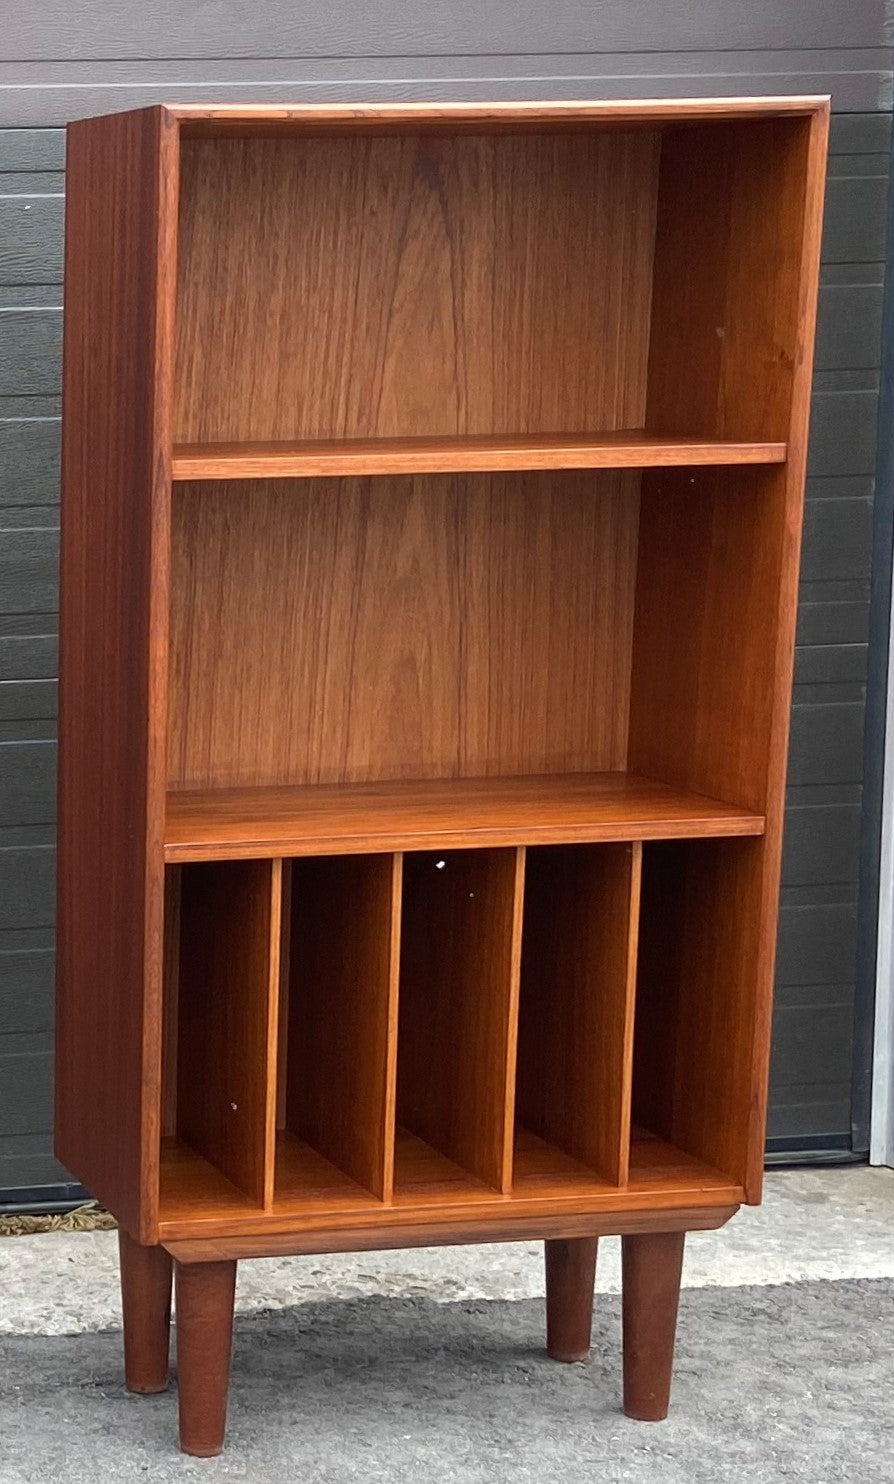 REFINISHED Danish MCM Record Cabinet, compact